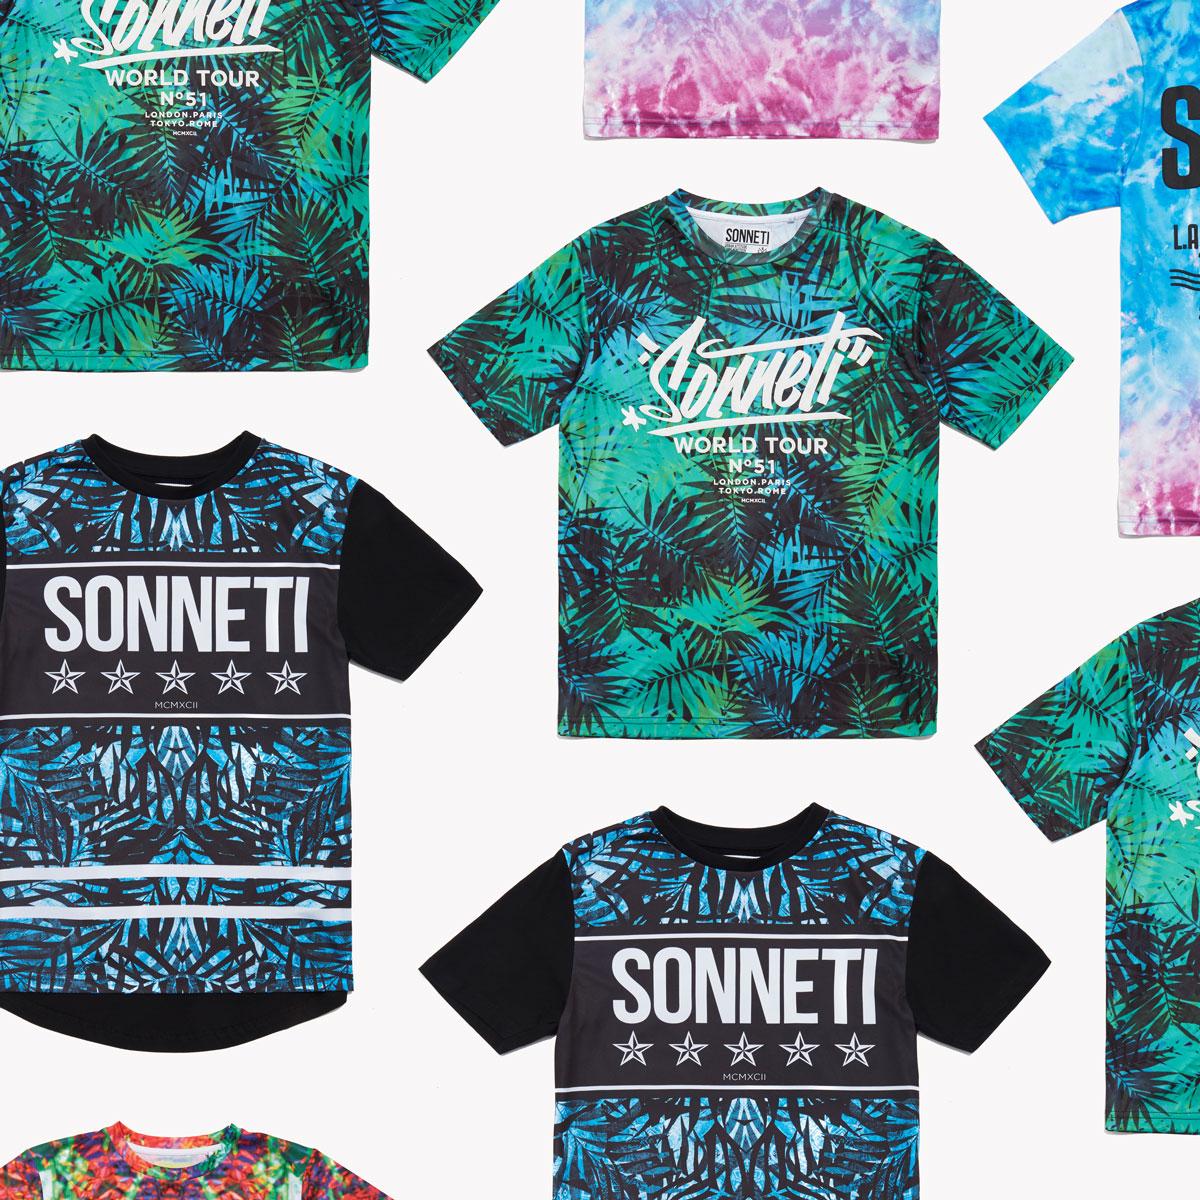 JD on X: "The latest range of kid's Sonneti t-shirts are available exclusively at JD in store and online→http://t.co/1szOJ0NZKM http://t.co/bZLrWfcrgG" / X